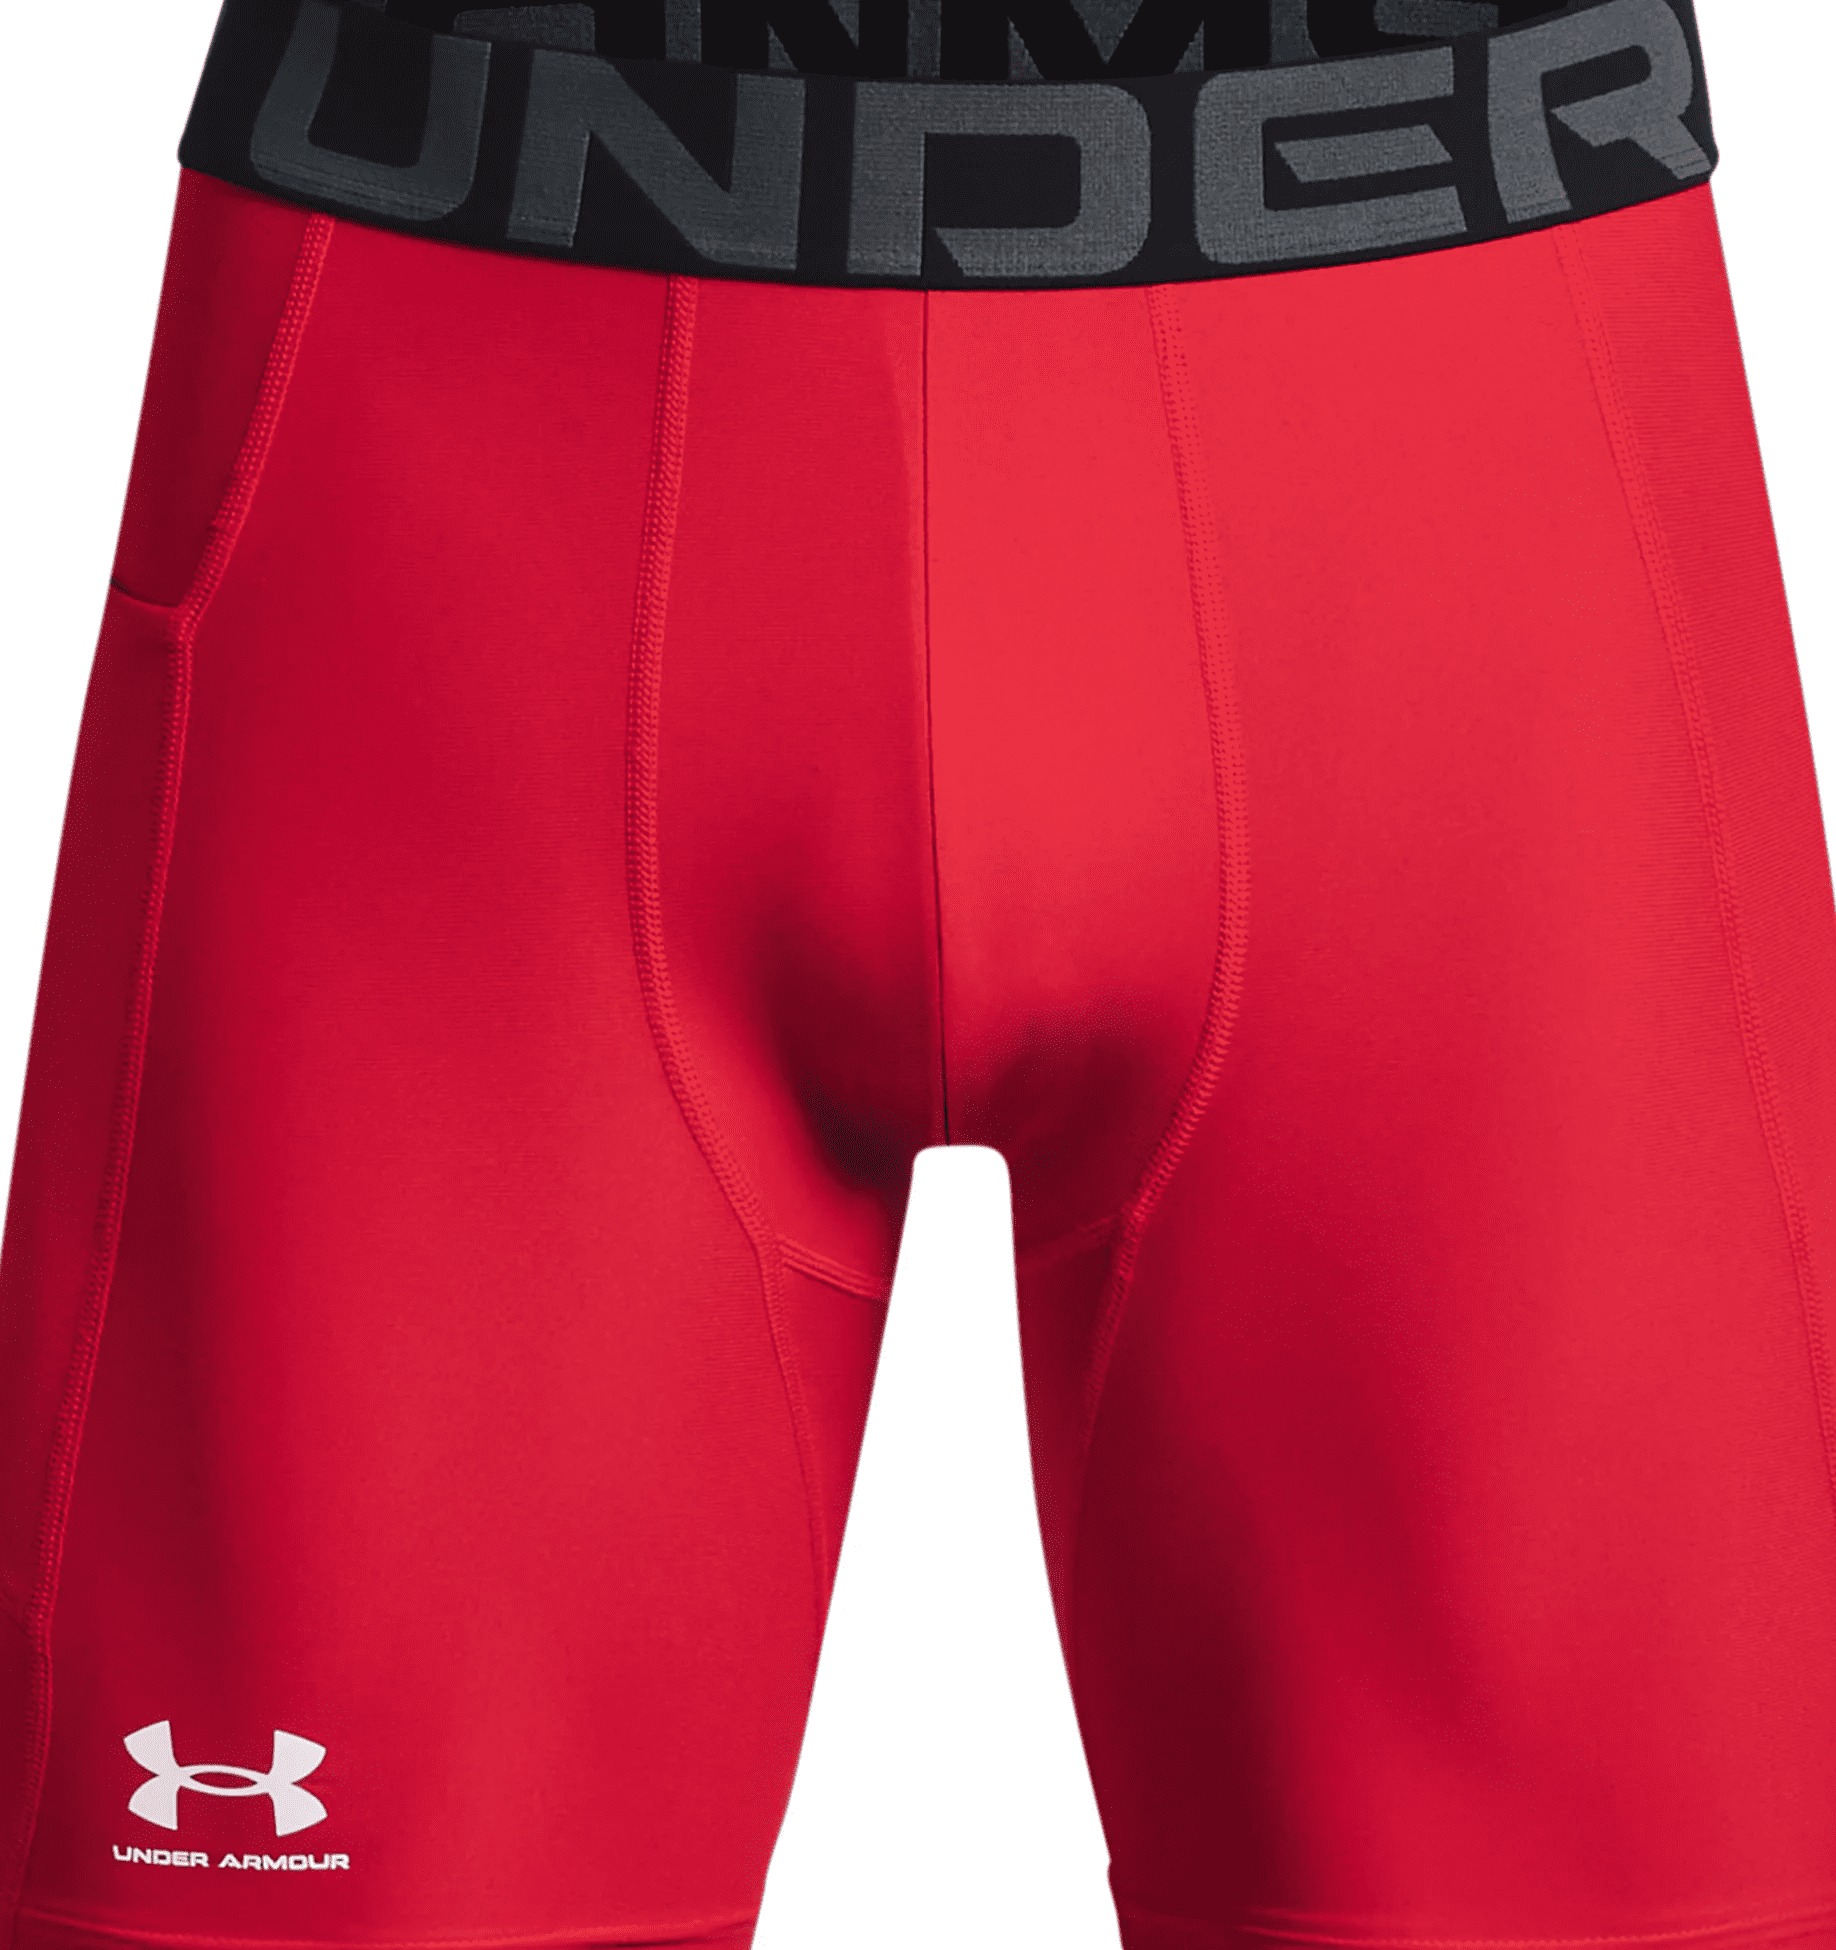 Under Armour HeatGear Armour Compression Shorts 1361596 - Red, 2XL